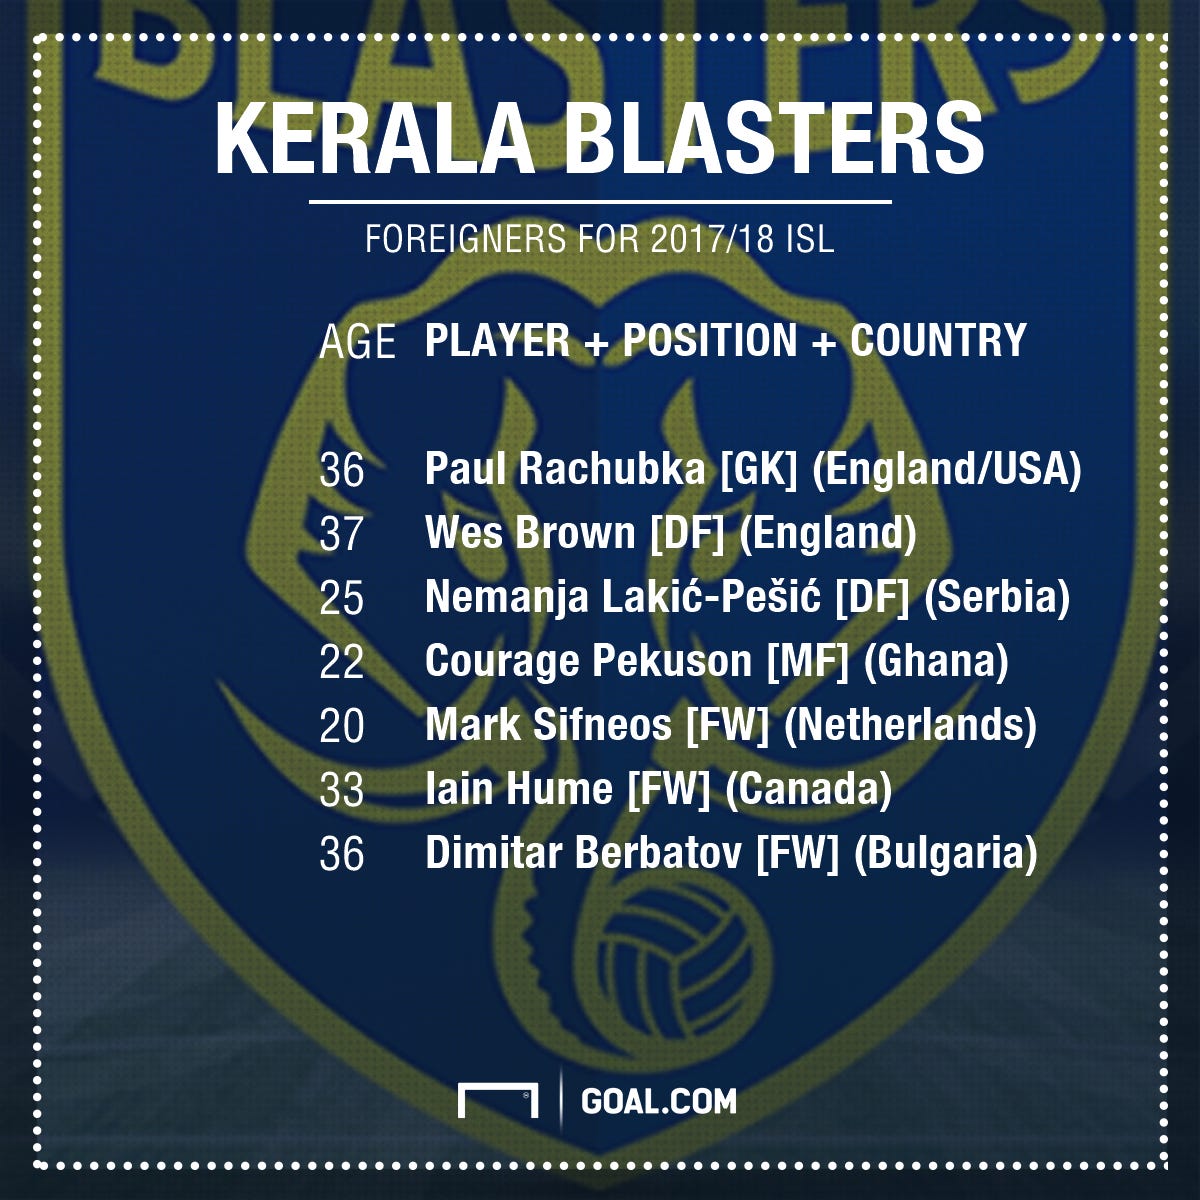 Kerala Blasters foreign clan